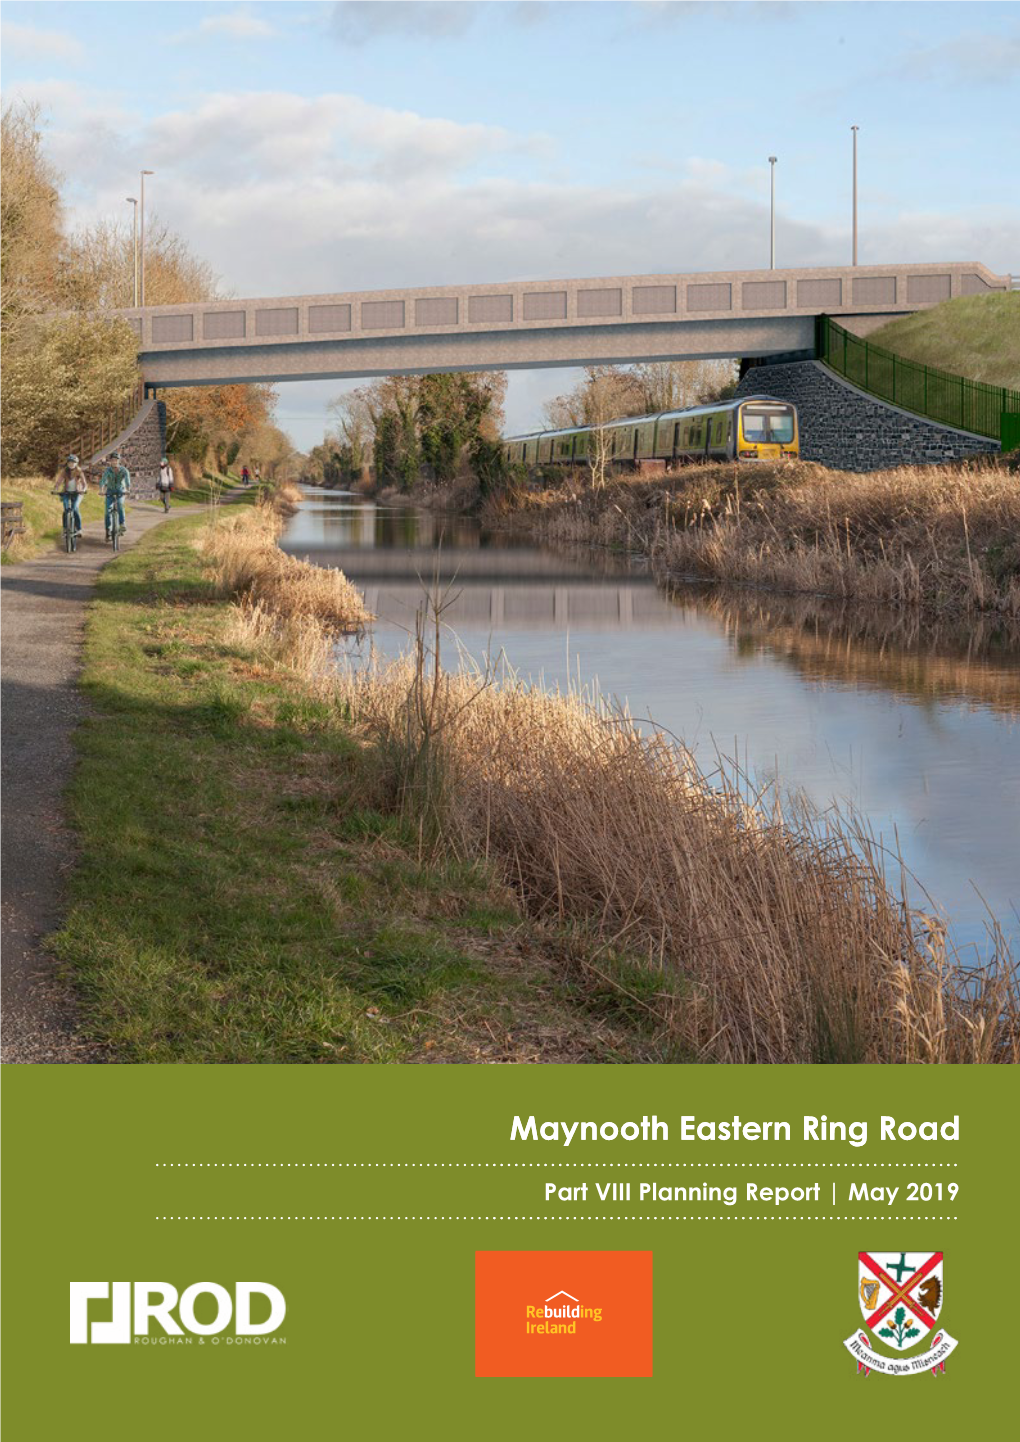 Maynooth Eastern Ring Road